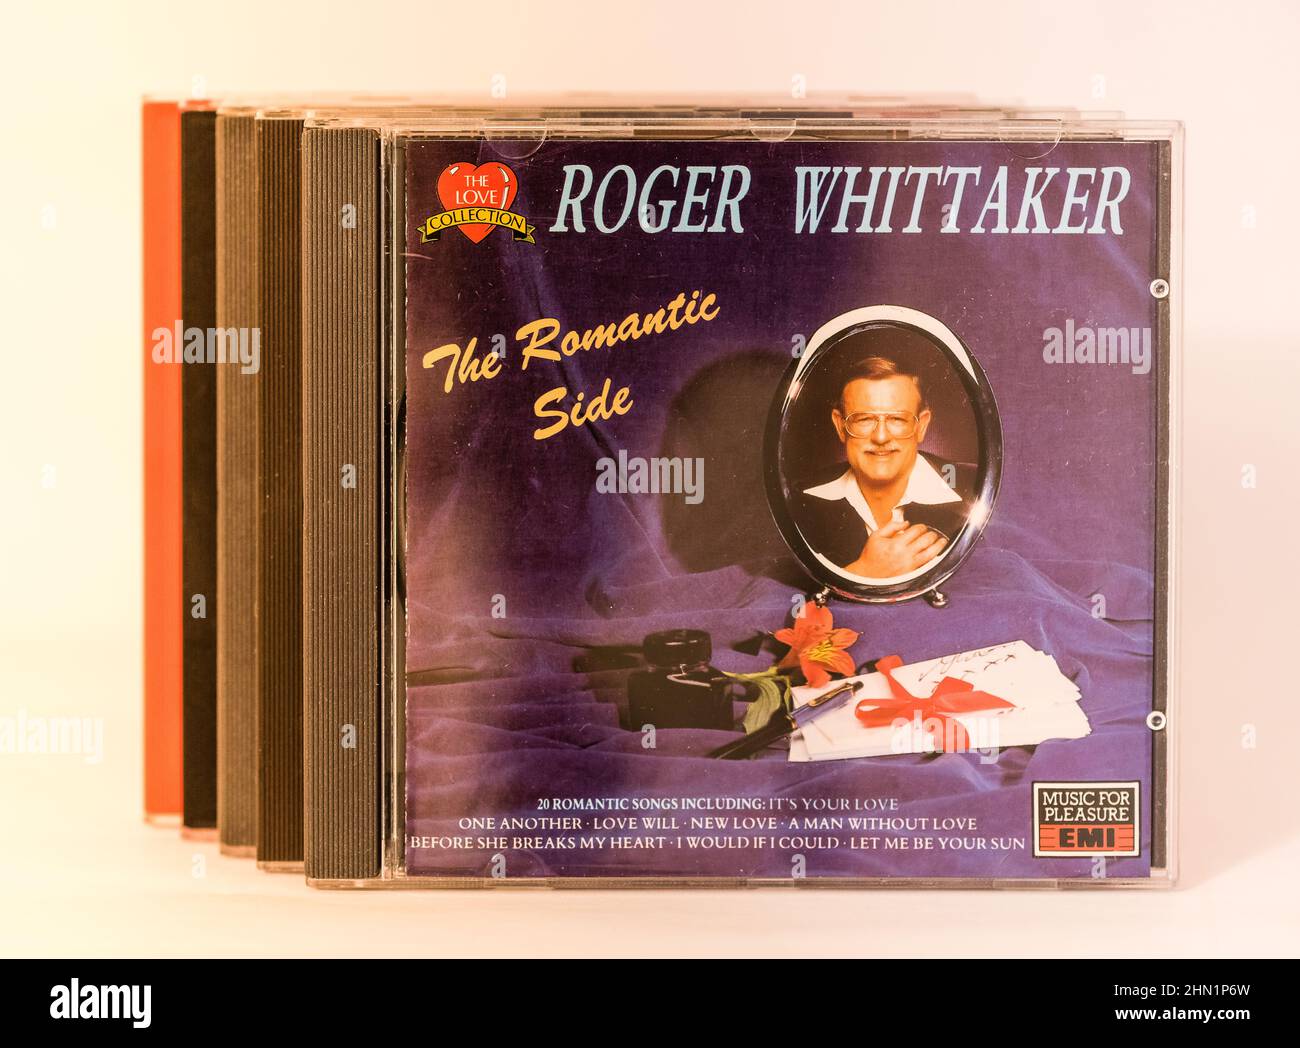 Memories of EMI - Roger Whittaker Compact Disc. Stock Photo